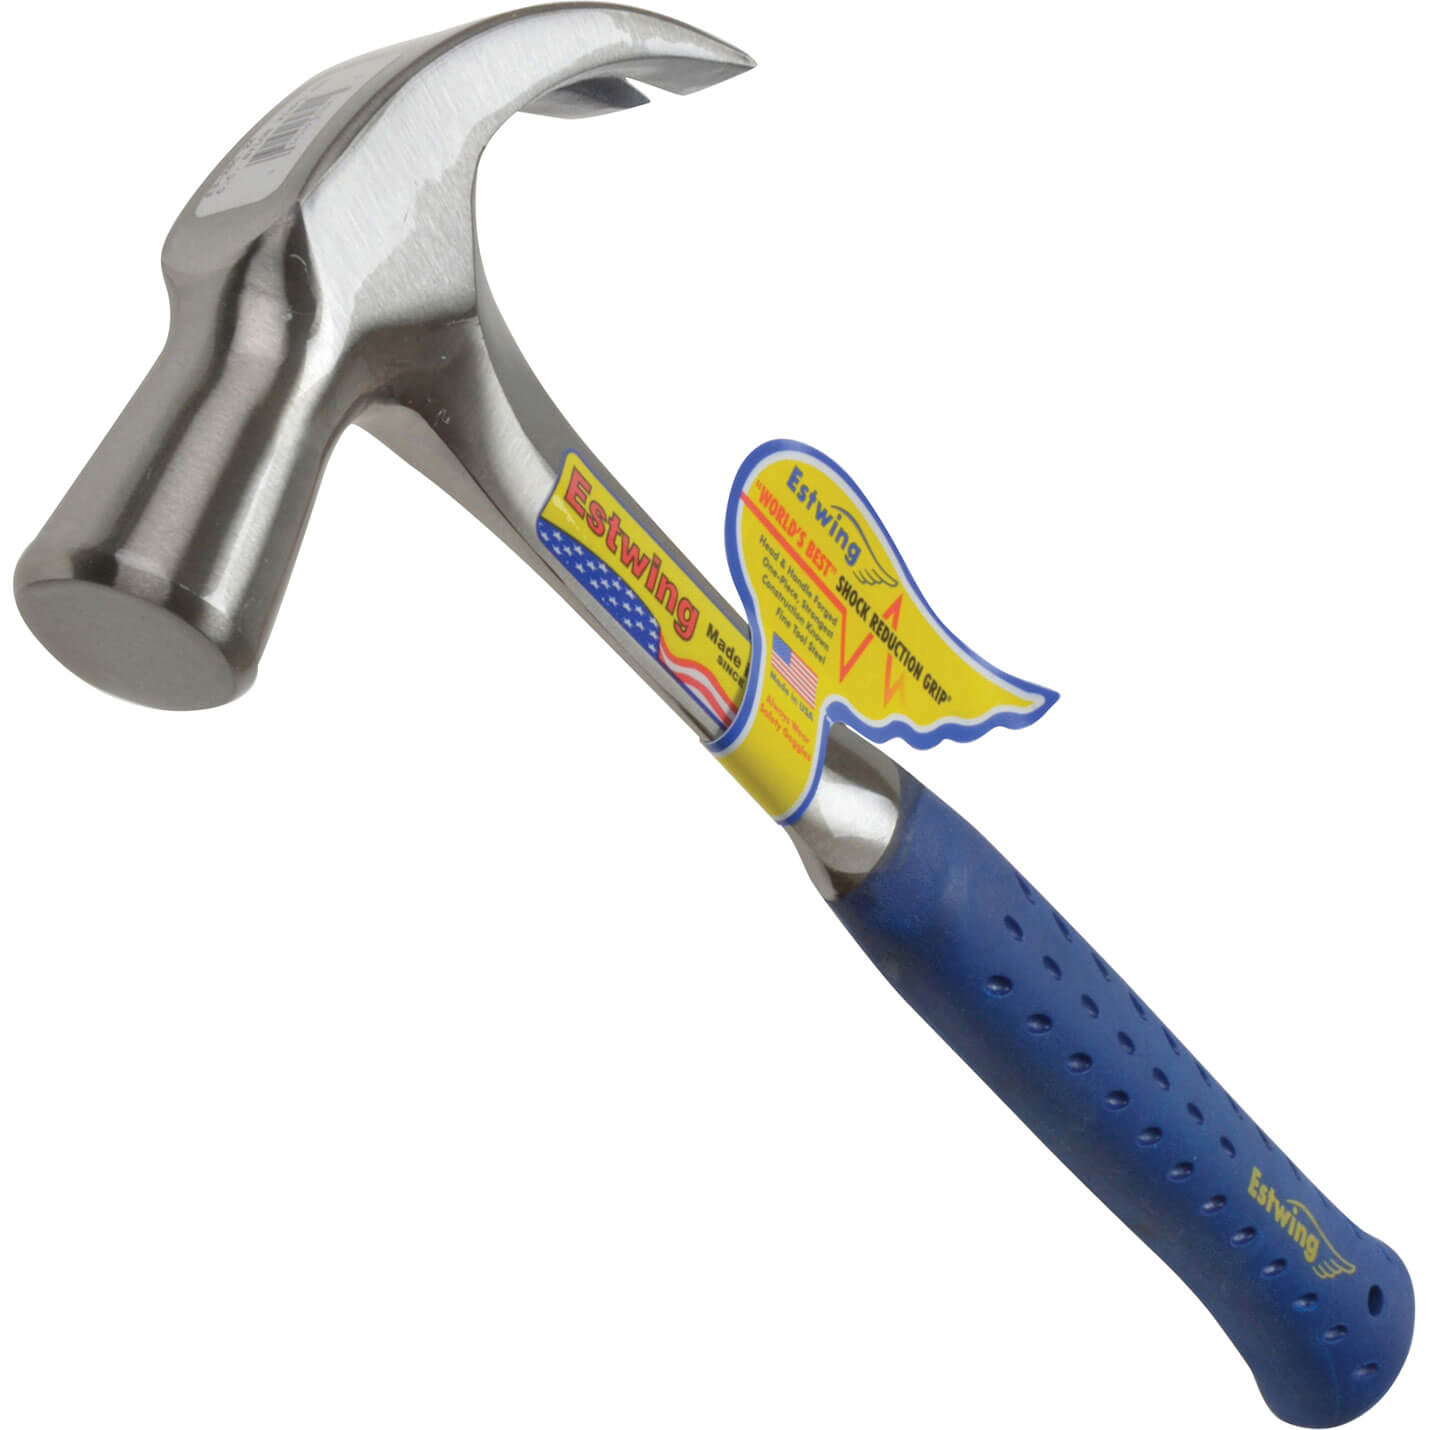 Photo of Estwing Curved Claw Hammer 680g